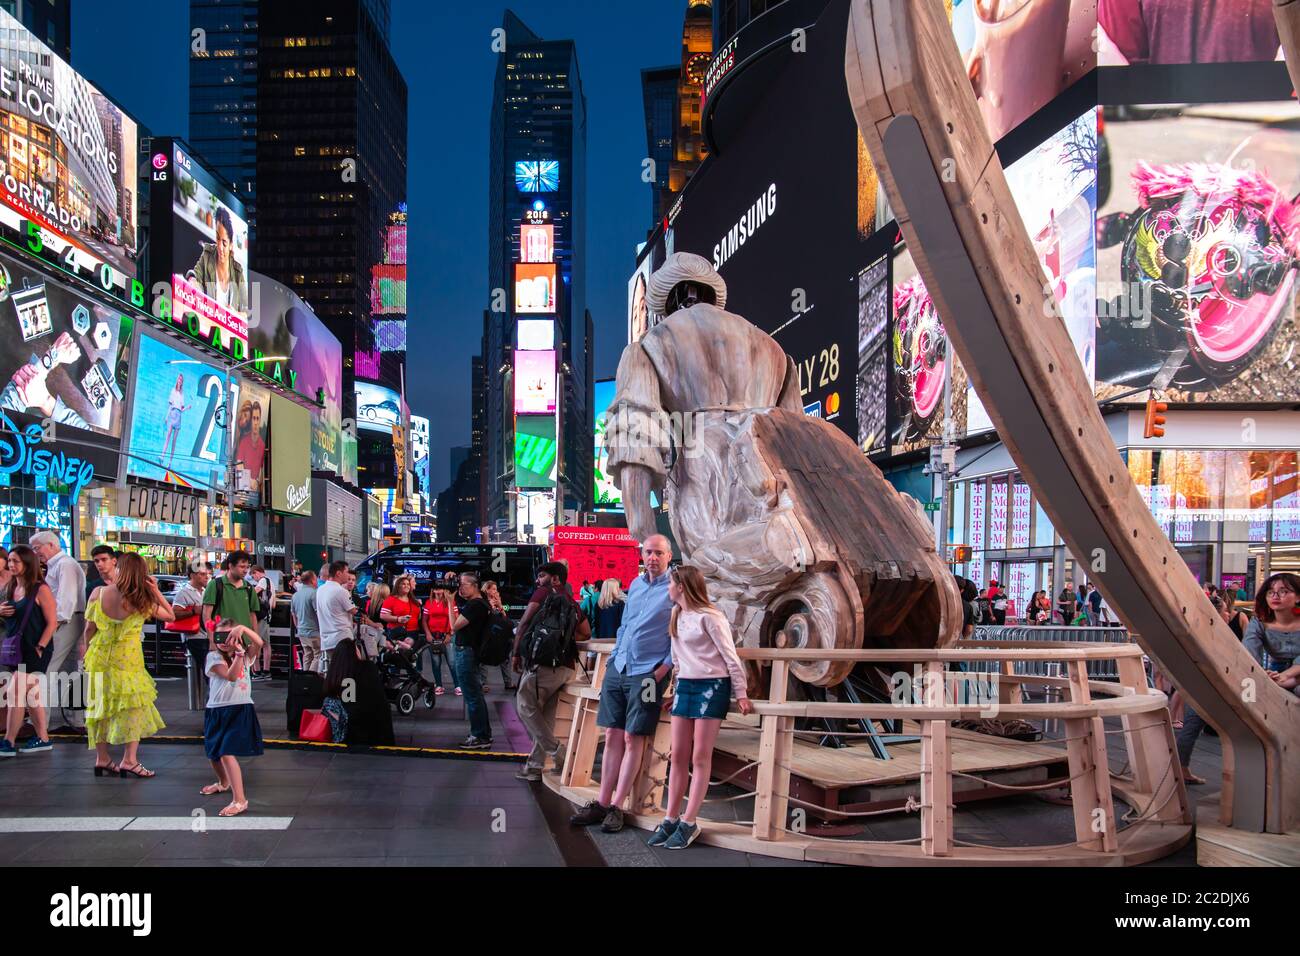 New York City / USA - JUL 13 2018: WAKE, parts of a shipwreck, modeled on the USS Nightingale by Mel Chin on Times Square Stock Photo